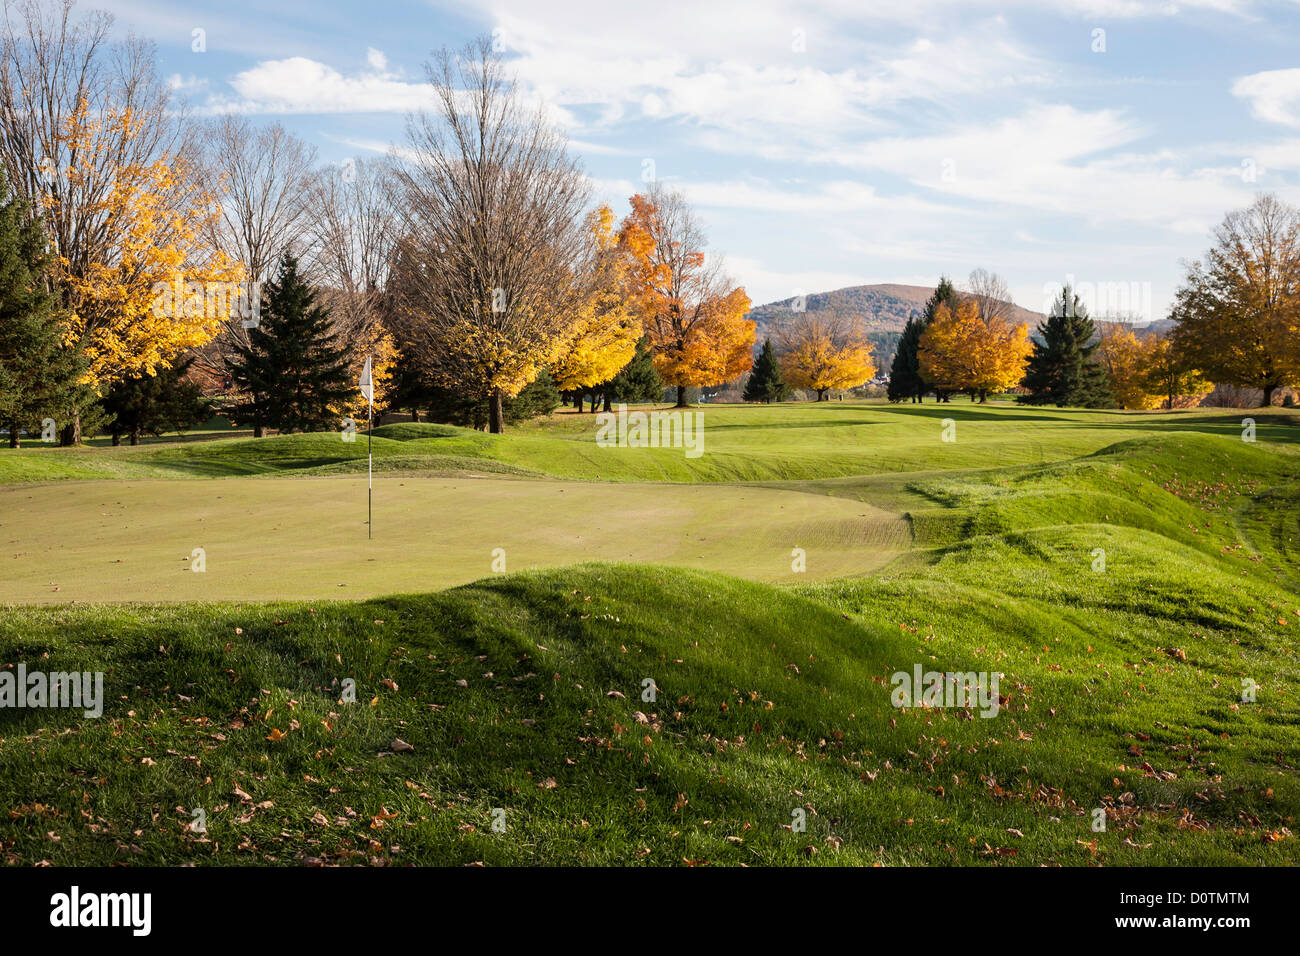 Leatherstocking Campo da Golf, Autunno, Cooperstown, NY Foto Stock